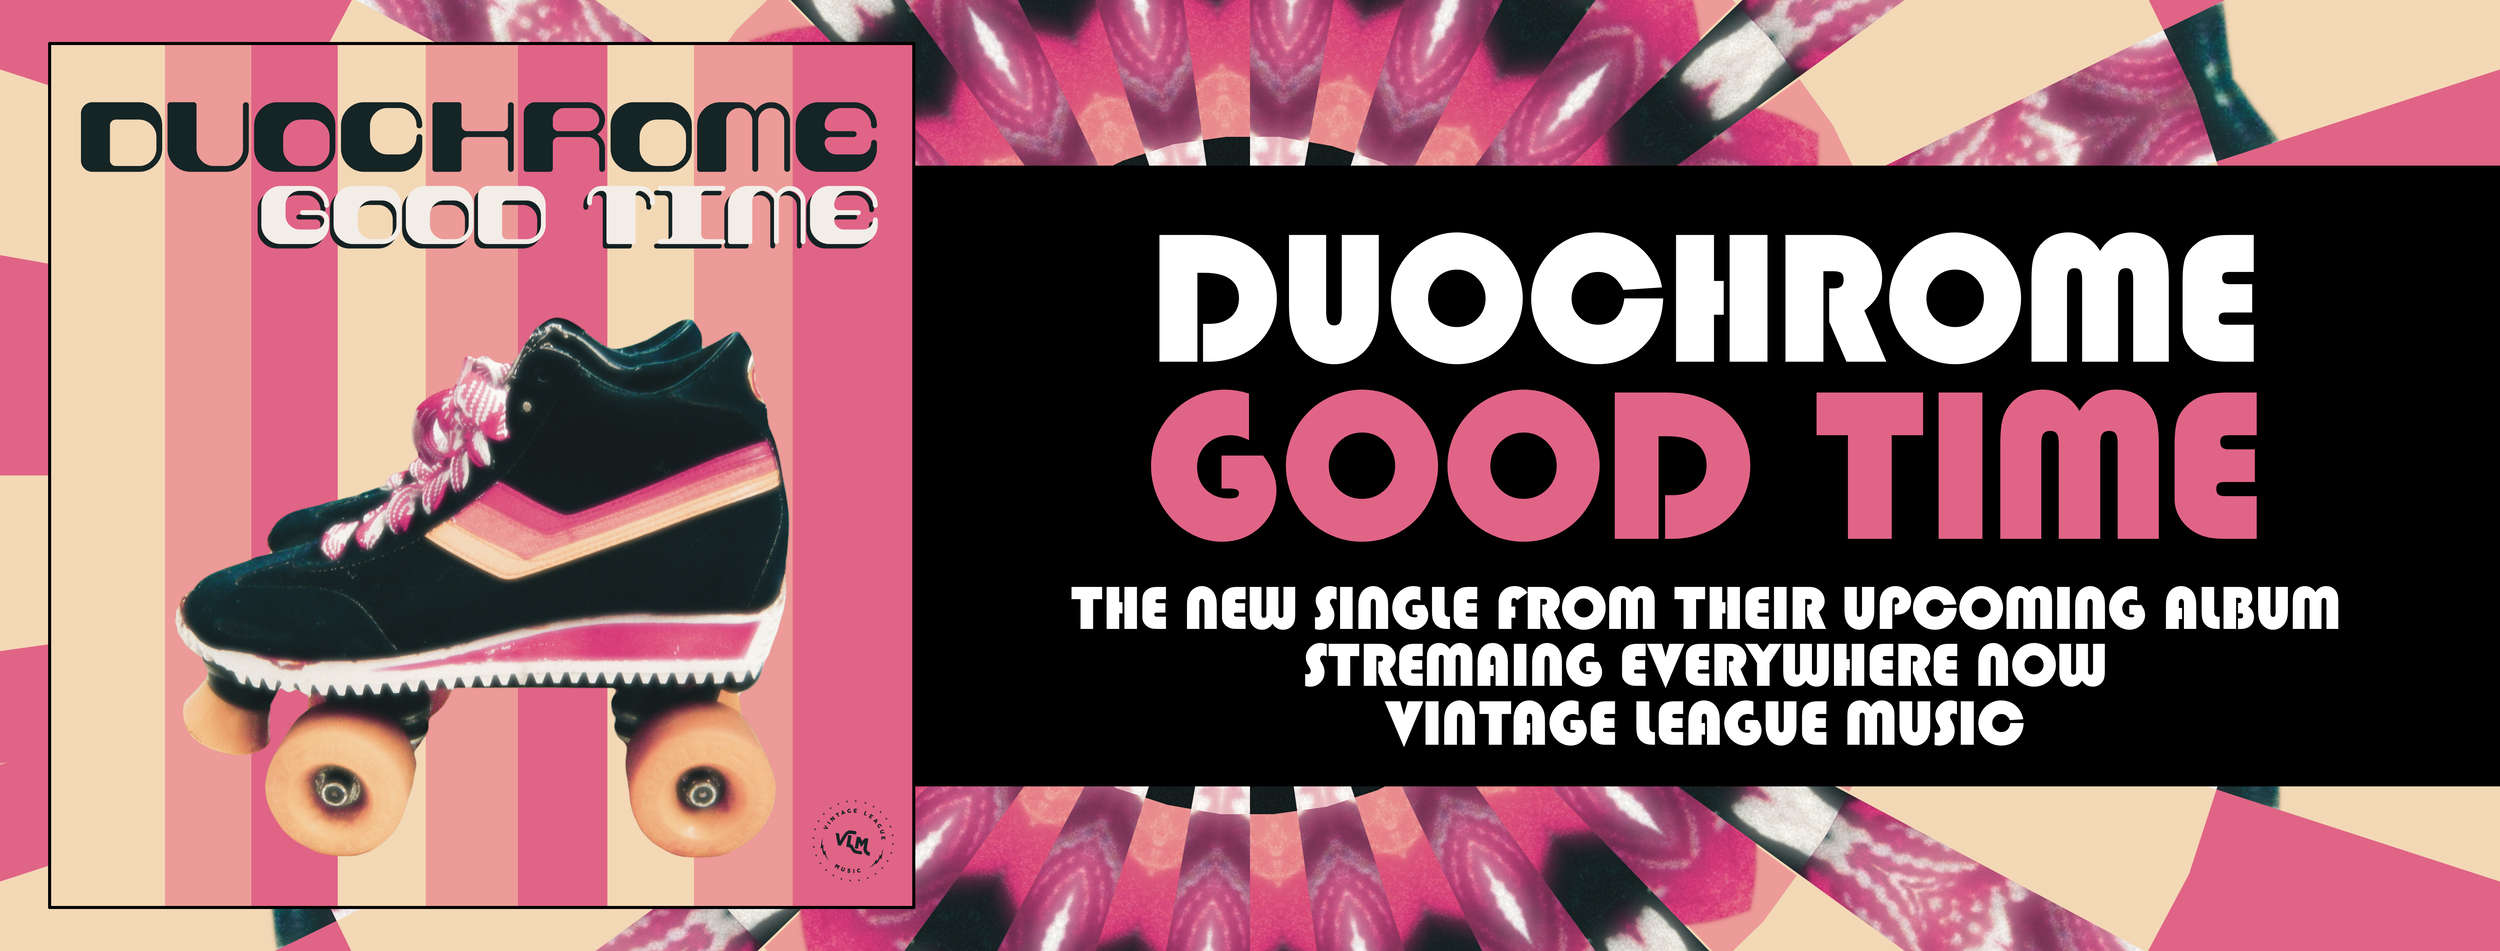 Duochrome - Good Time - single Banner@3x.png